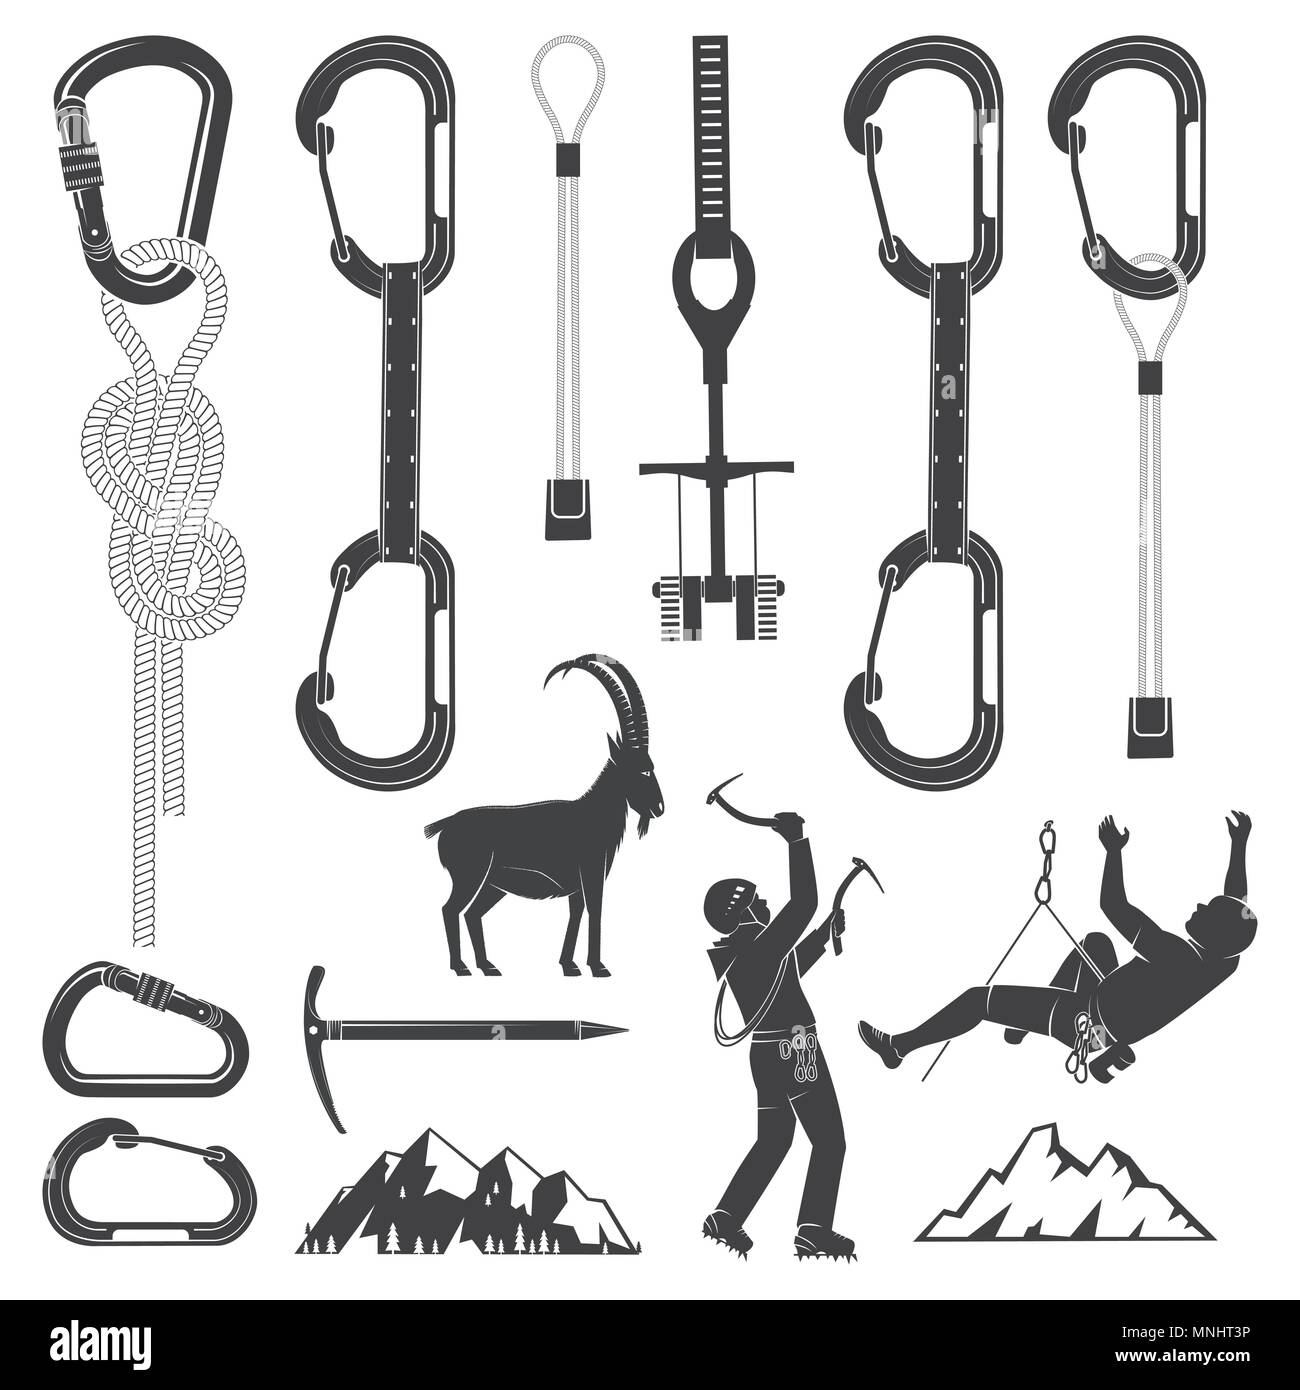 Set of Alpine Climbing Equipment silhouette icons. Set include ice axe, mountains, goat, camming devices, climbing hardware and carabiners. Equipment  Stock Vector